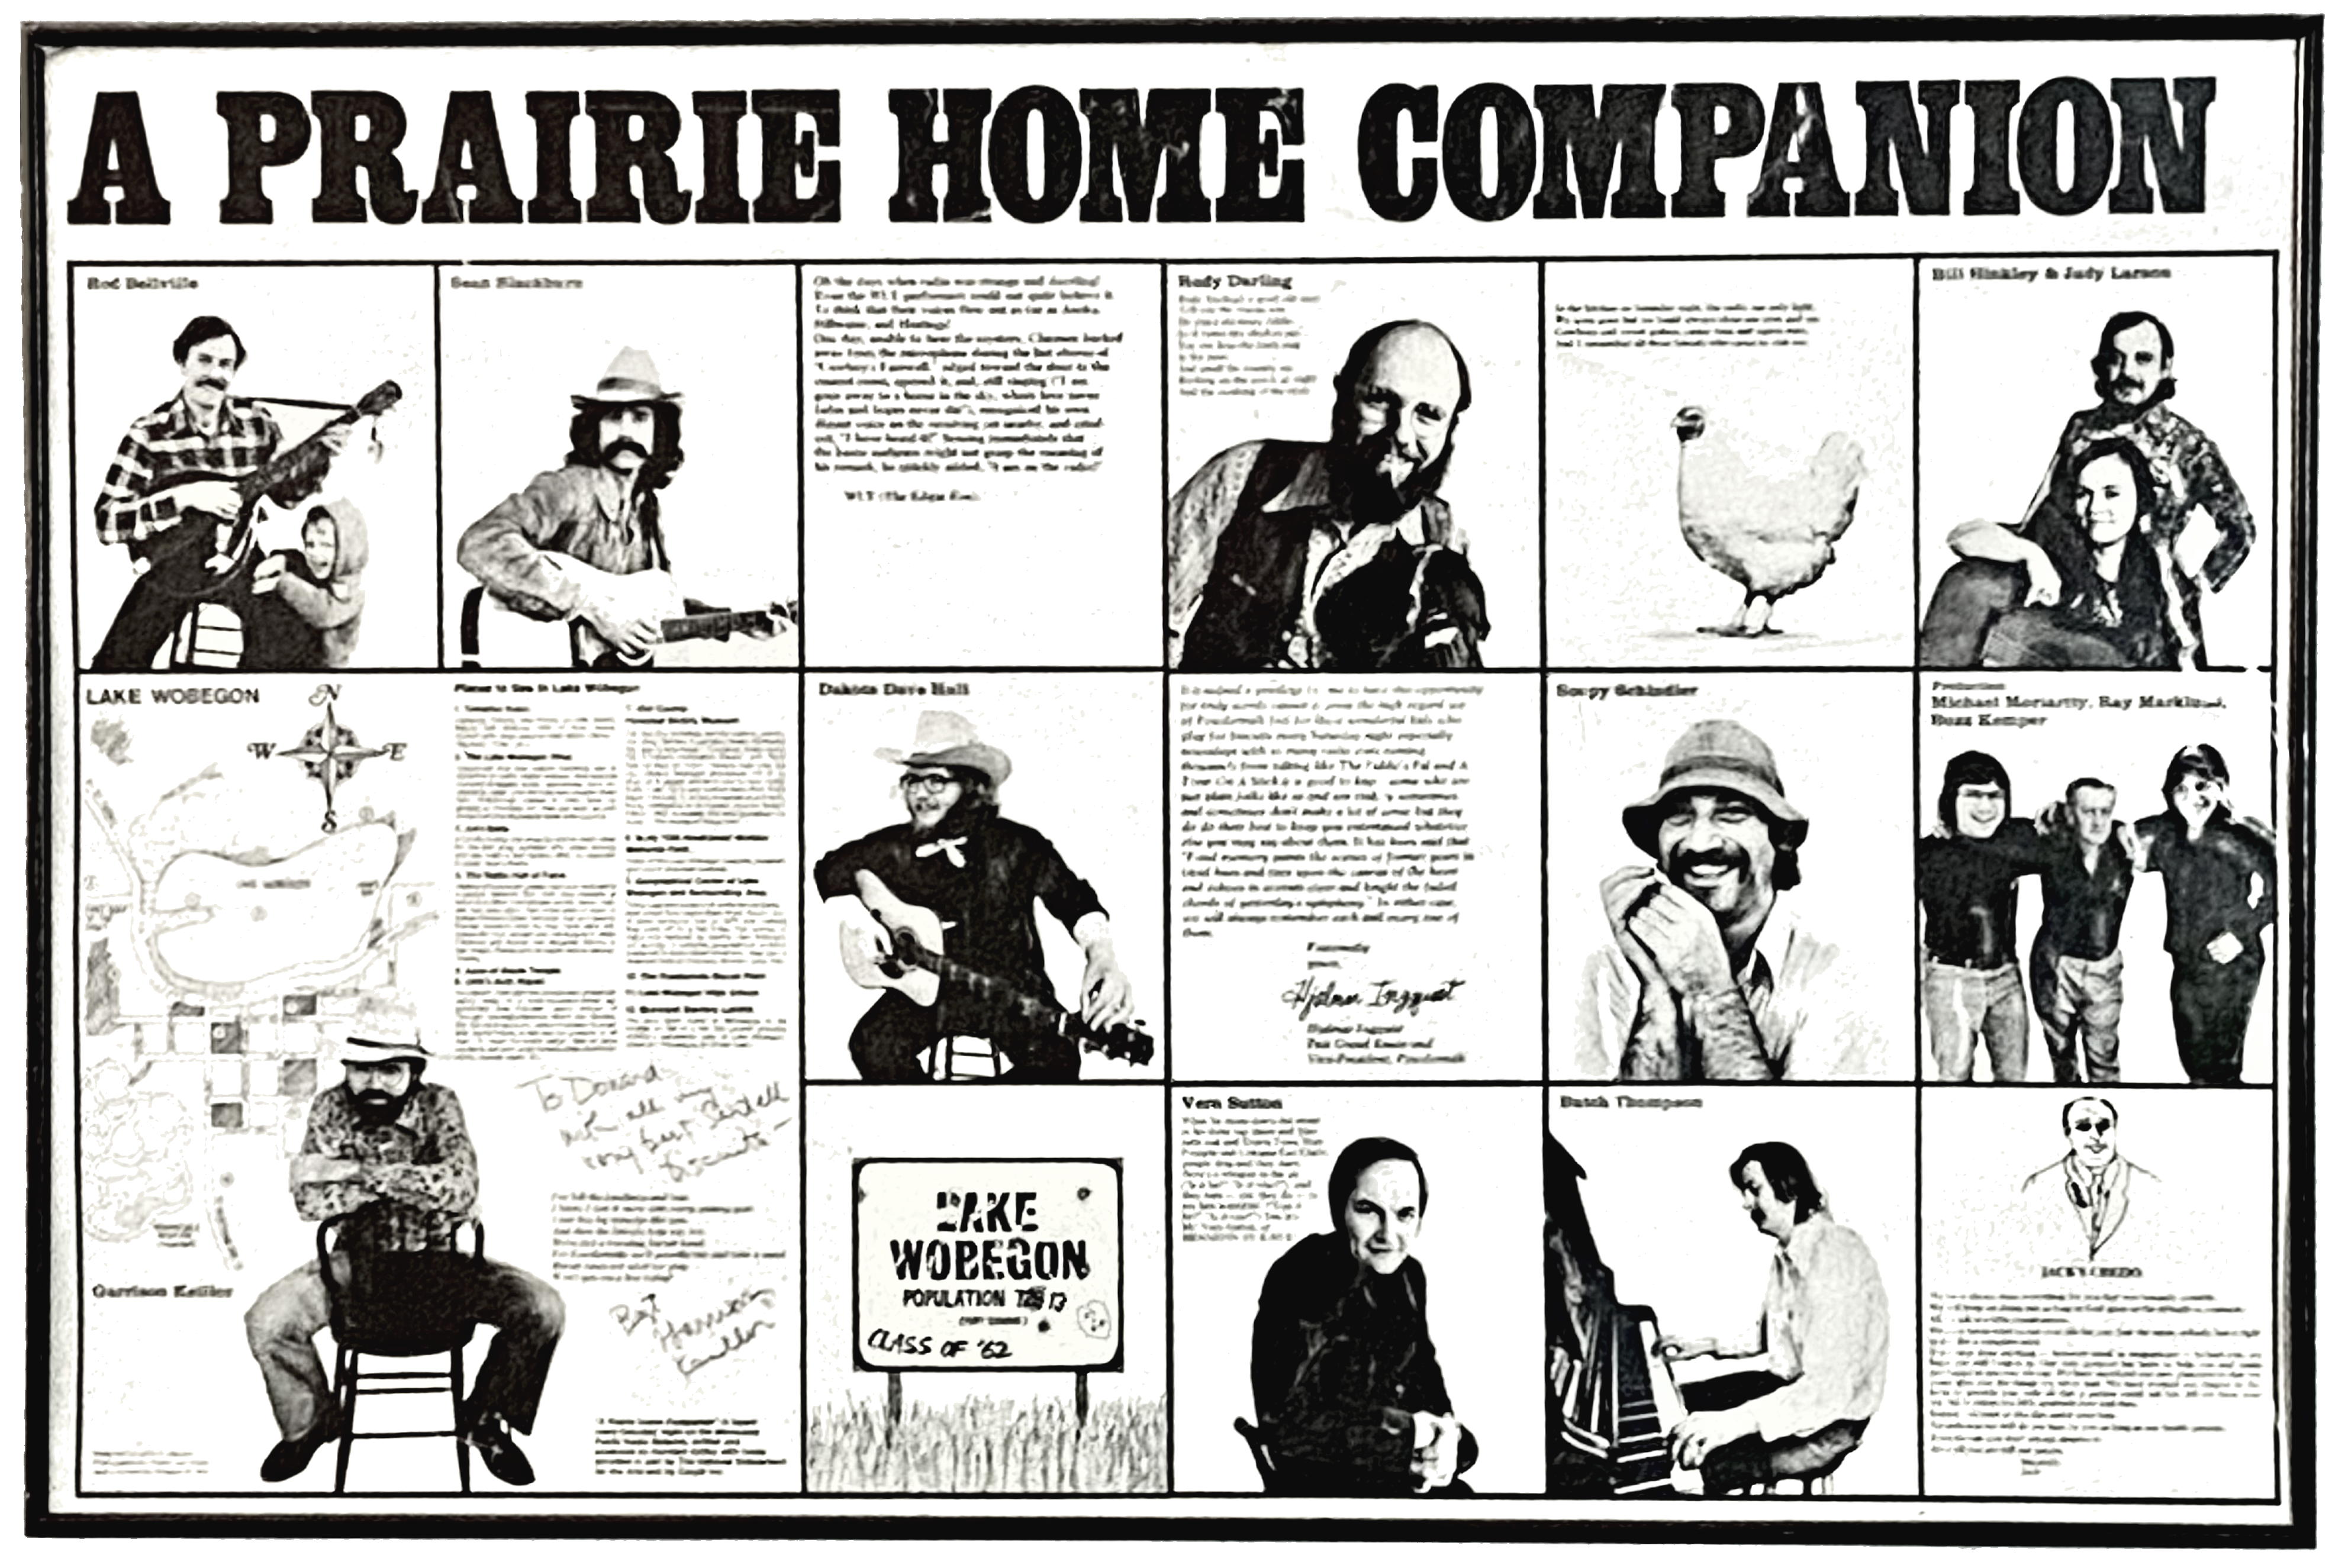 image of the 1975 'A Prairie Home Companion' poster i got for Dad